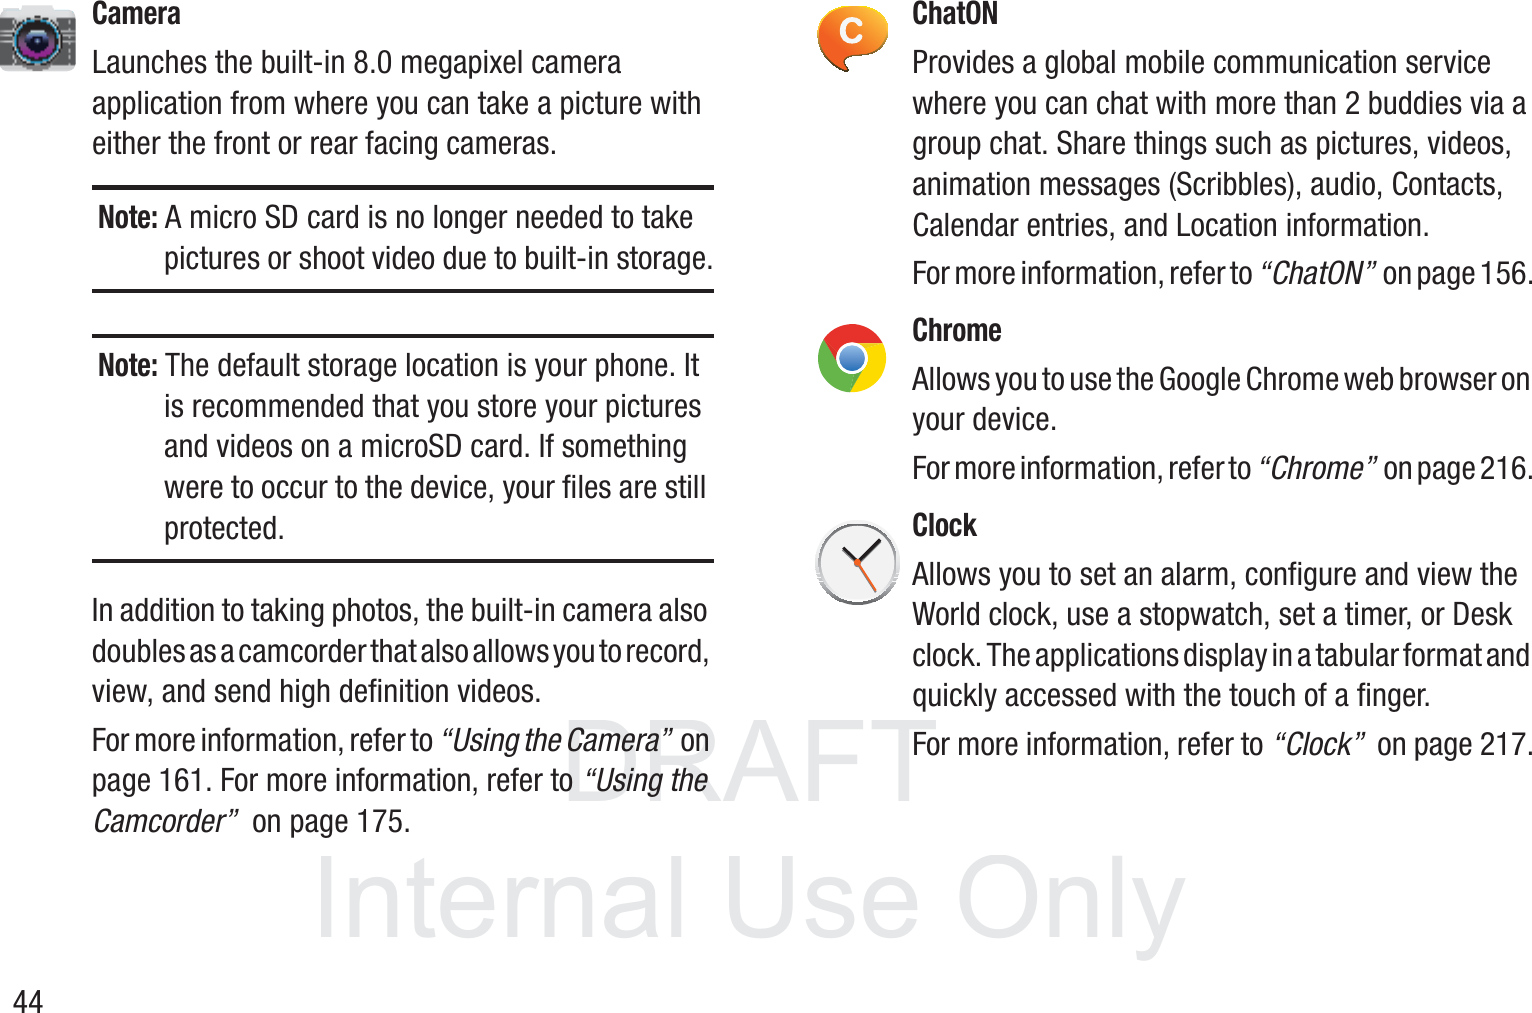 DRAFT InternalUse Only44CameraLaunches the built-in 8.0 megapixel camera application from where you can take a picture with either the front or rear facing cameras.Note: A micro SD card is no longer needed to take pictures or shoot video due to built-in storage.Note: The default storage location is your phone. It is recommended that you store your pictures and videos on a microSD card. If something were to occur to the device, your files are still protected.In addition to taking photos, the built-in camera also doubles as a camcorder that also allows you to record, view, and send high definition videos. For more information, refer to “Using the Camera”  on page 161. For more information, refer to “Using the Camcorder”  on page 175.ChatONProvides a global mobile communication service where you can chat with more than 2 buddies via a group chat. Share things such as pictures, videos, animation messages (Scribbles), audio, Contacts, Calendar entries, and Location information. For more information, refer to “ChatON”  on page 156.ChromeAllows you to use the Google Chrome web browser on your device.For more information, refer to “Chrome”  on page 216.ClockAllows you to set an alarm, configure and view the World clock, use a stopwatch, set a timer, or Desk clock. The applications display in a tabular format and quickly accessed with the touch of a finger. For more information, refer to “Clock”  on page 217.